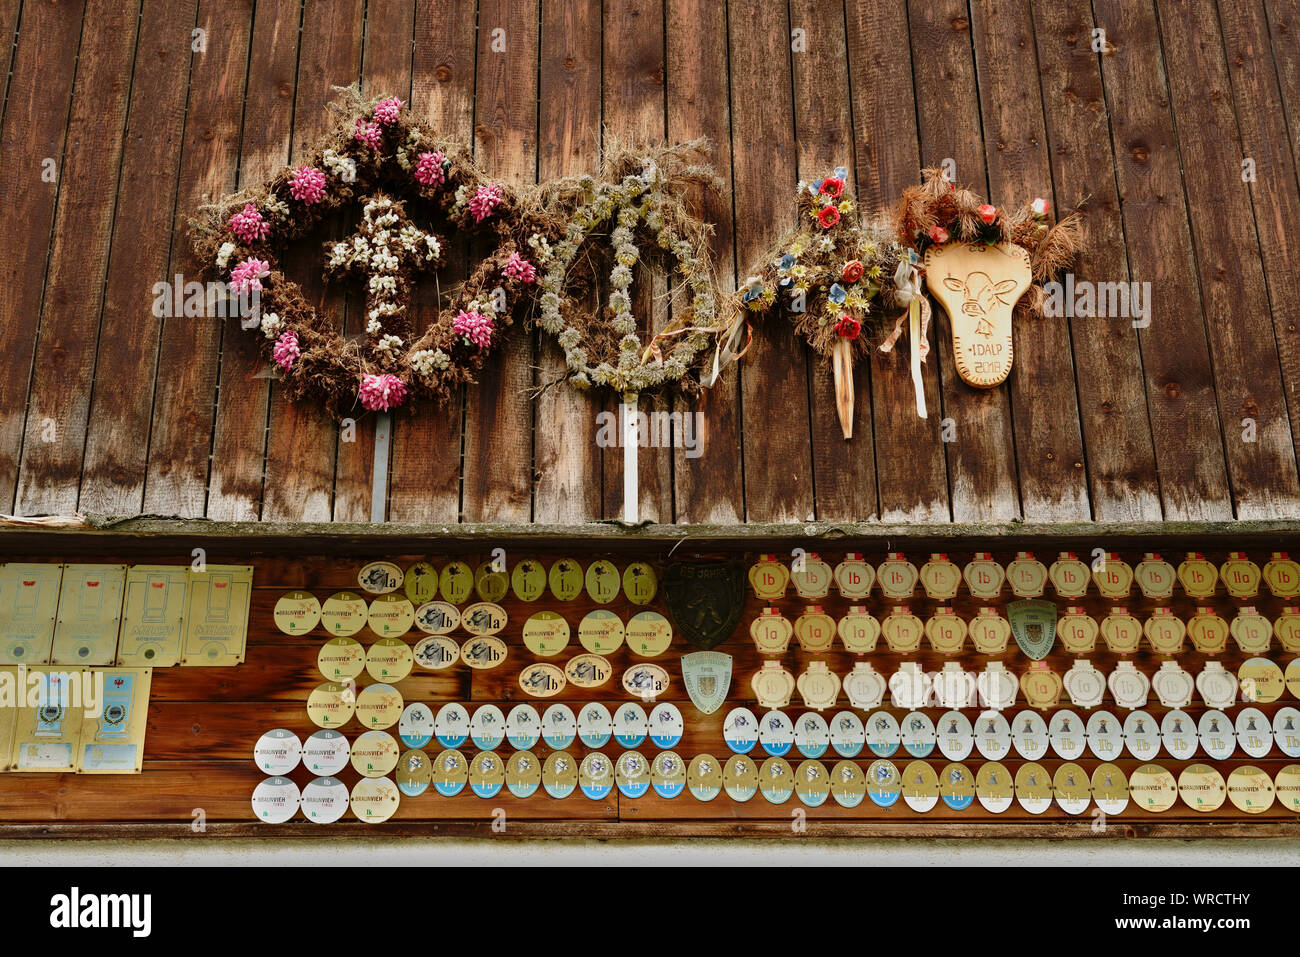 Dried flower arrangements for cattle drive and awards on metal badges for dairy cows attached to a wooden barn. Traditional cattle farming, Austria. Stock Photo